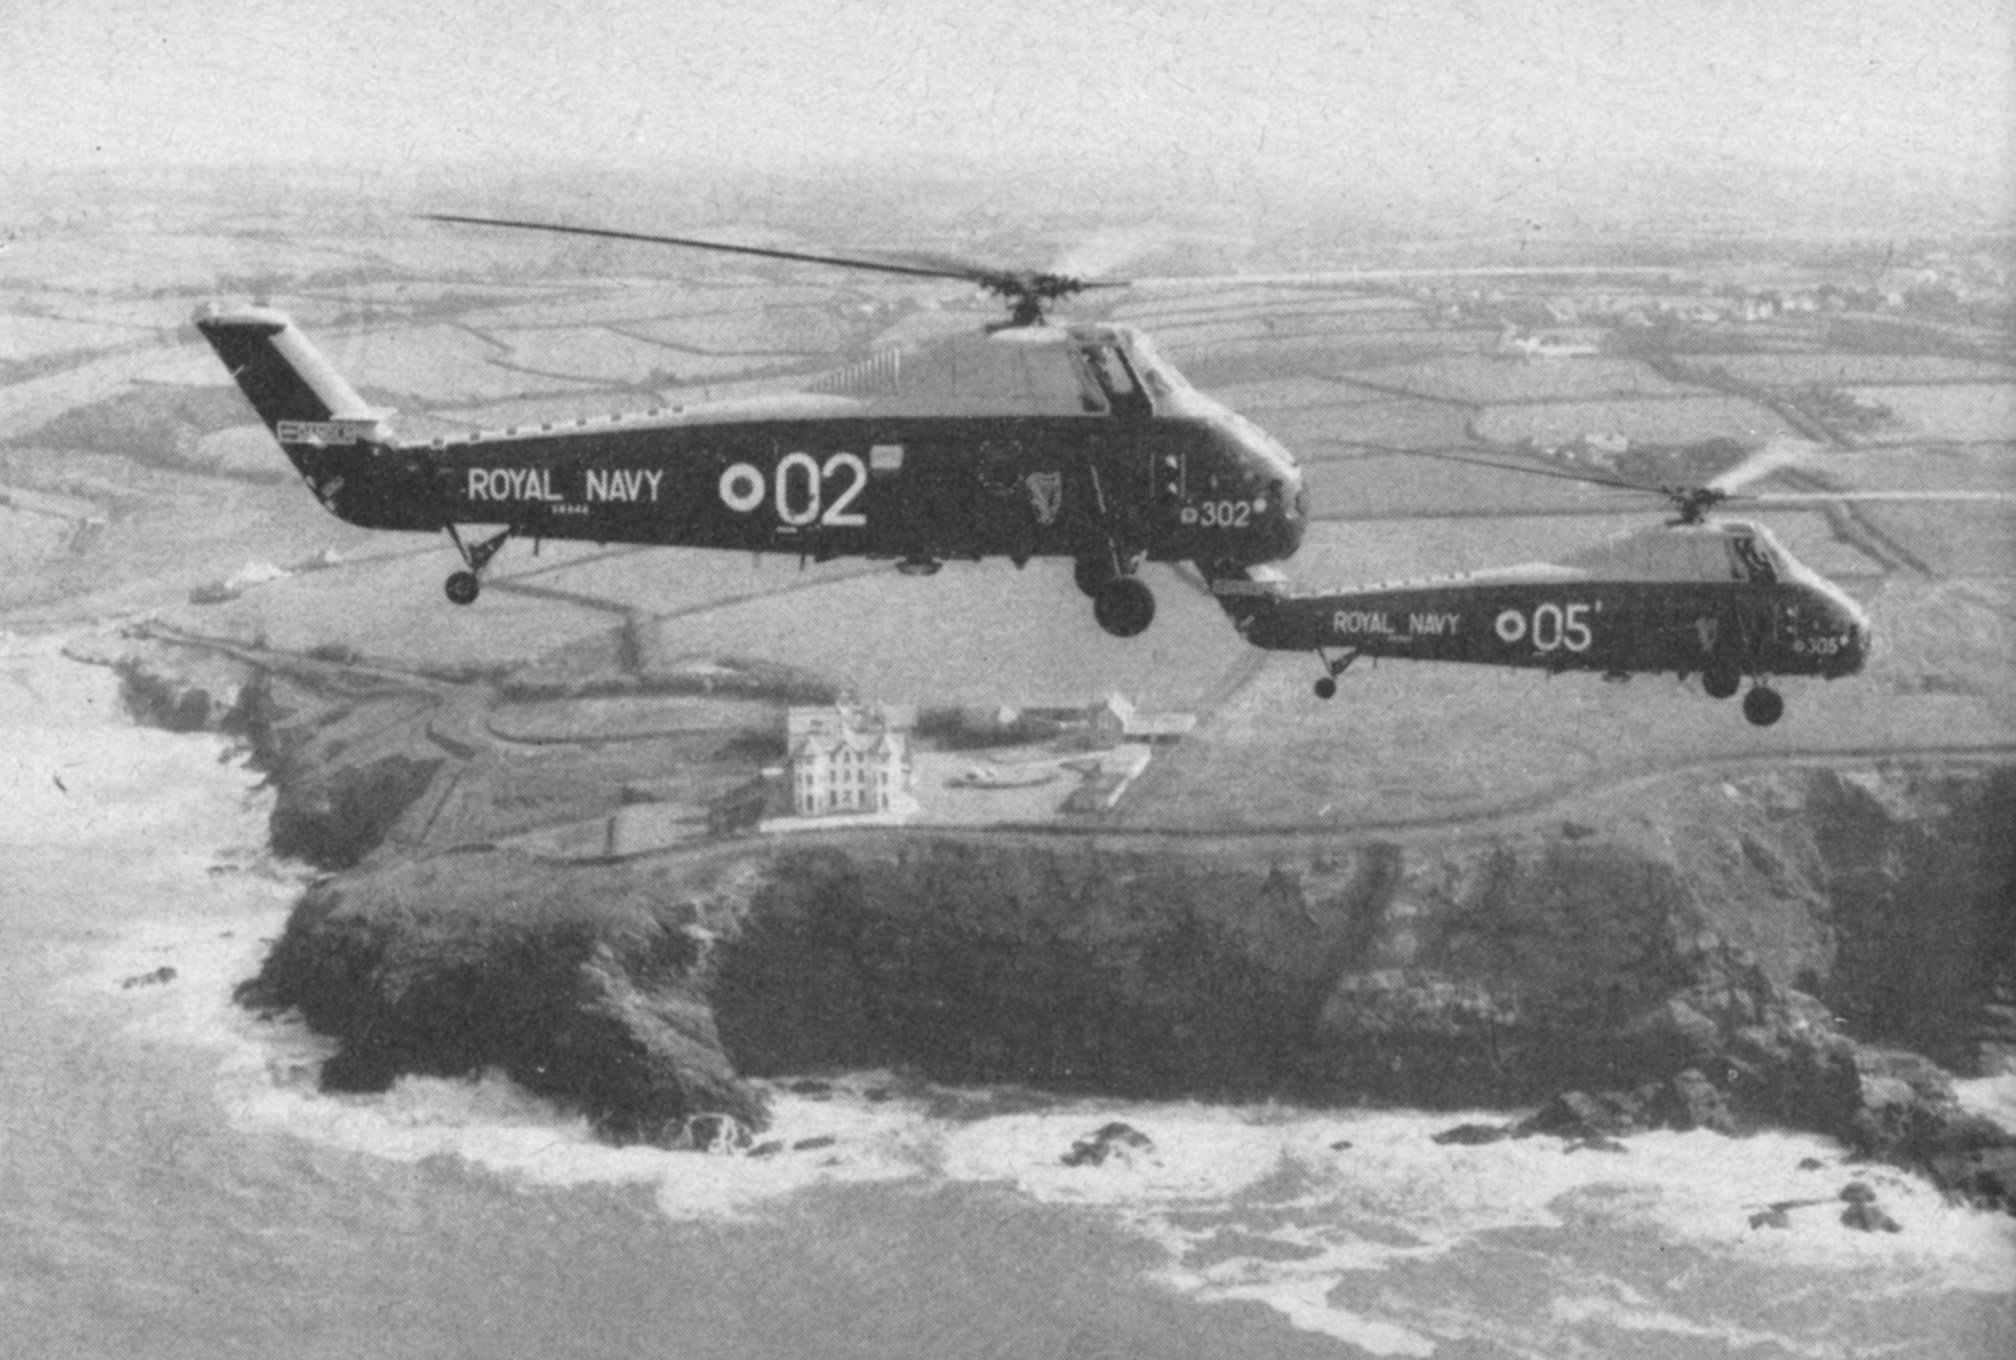 Wessexes “302” and “305”, piloted by Lieut. D. G. H. Fraser, R. C. N. and Sub. Lieut. N. P. E. Edwards respectively, pass Poldhu on the Cornish coast.